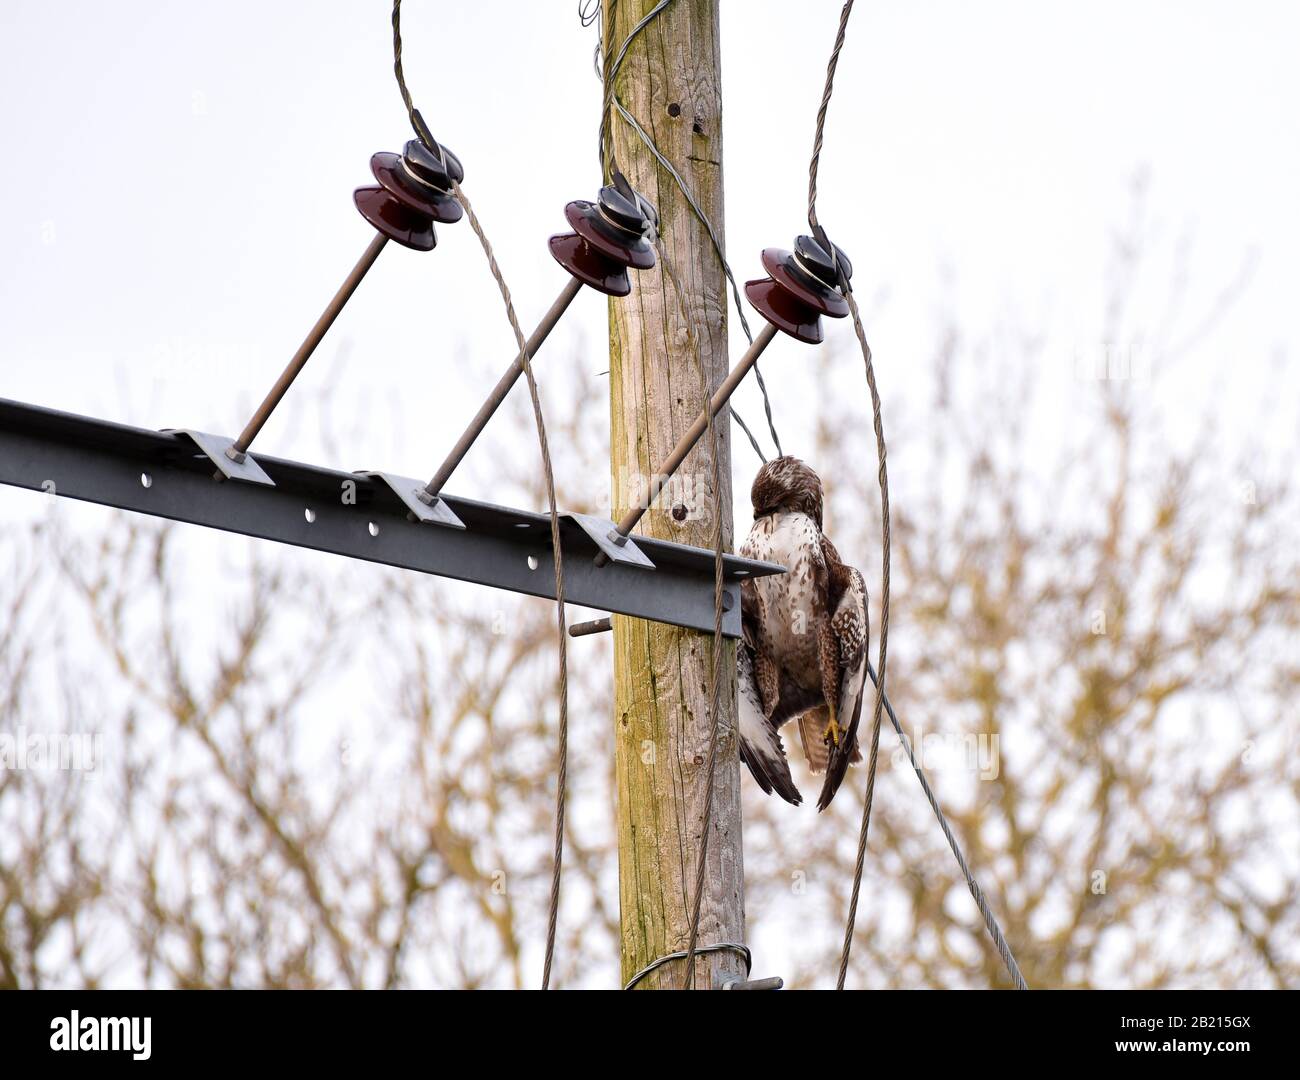 A dead Buzzard killed on electricity pole on the edge of the Lodge Field Stock Photo